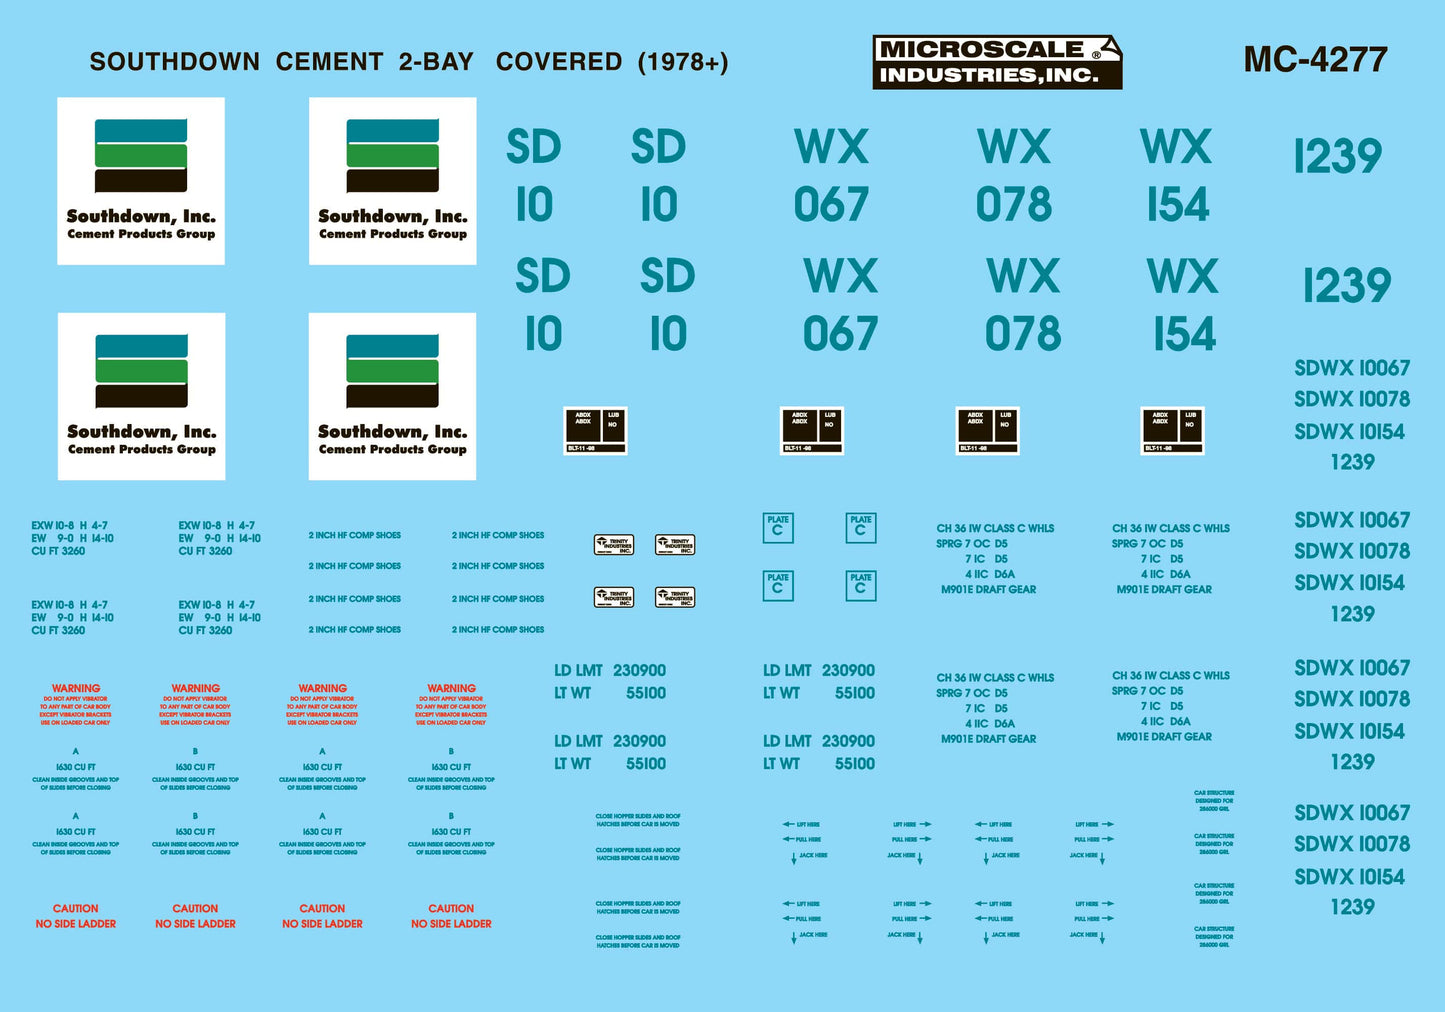 Microscale 60-4277 N 1998+ Southdown Cement Co 2-Bay Covered Hopper Decal Sheet